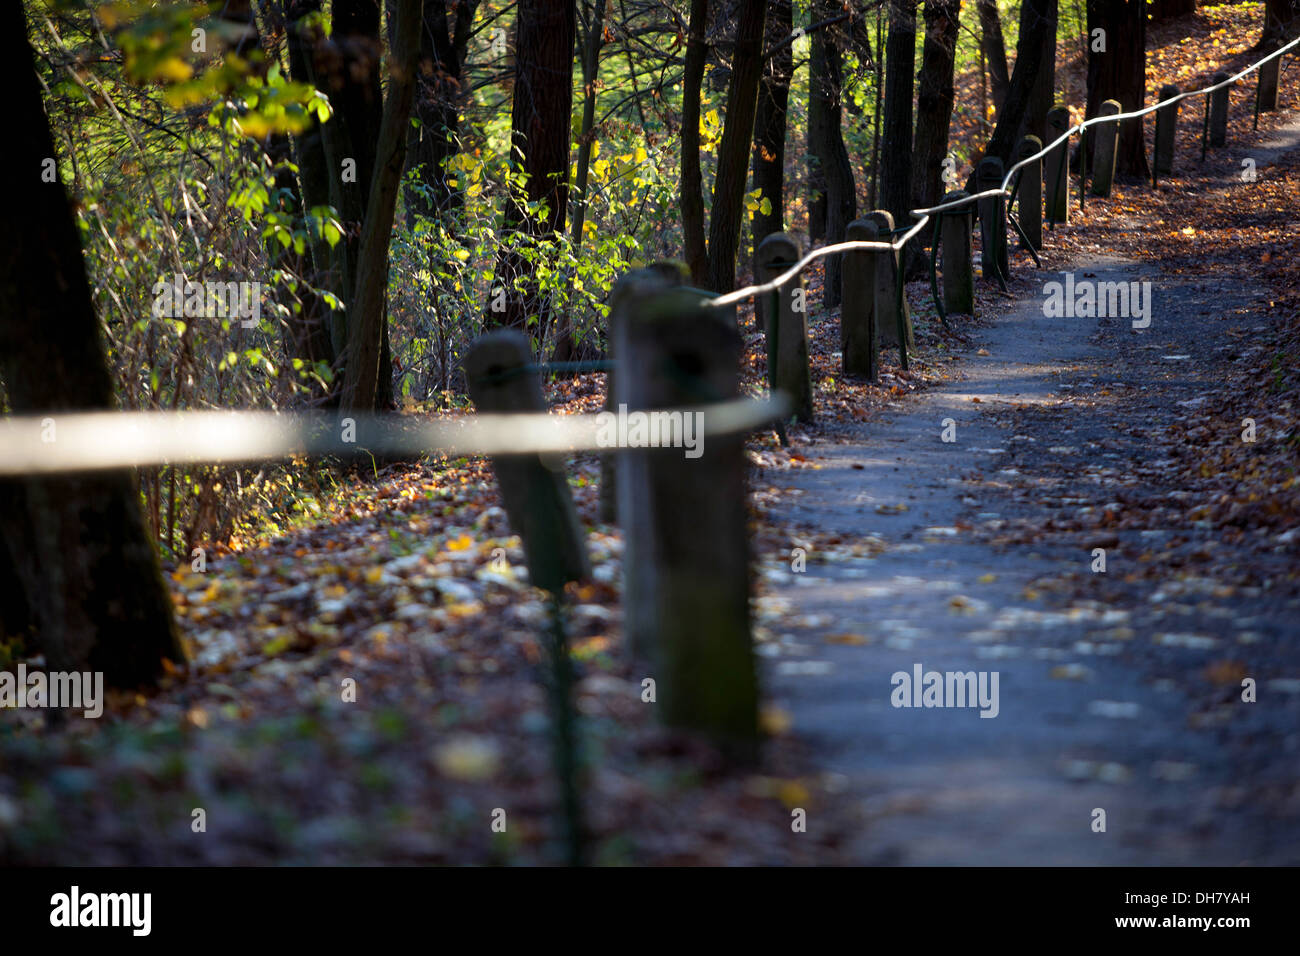 The path through the woods along the railing Stock Photo